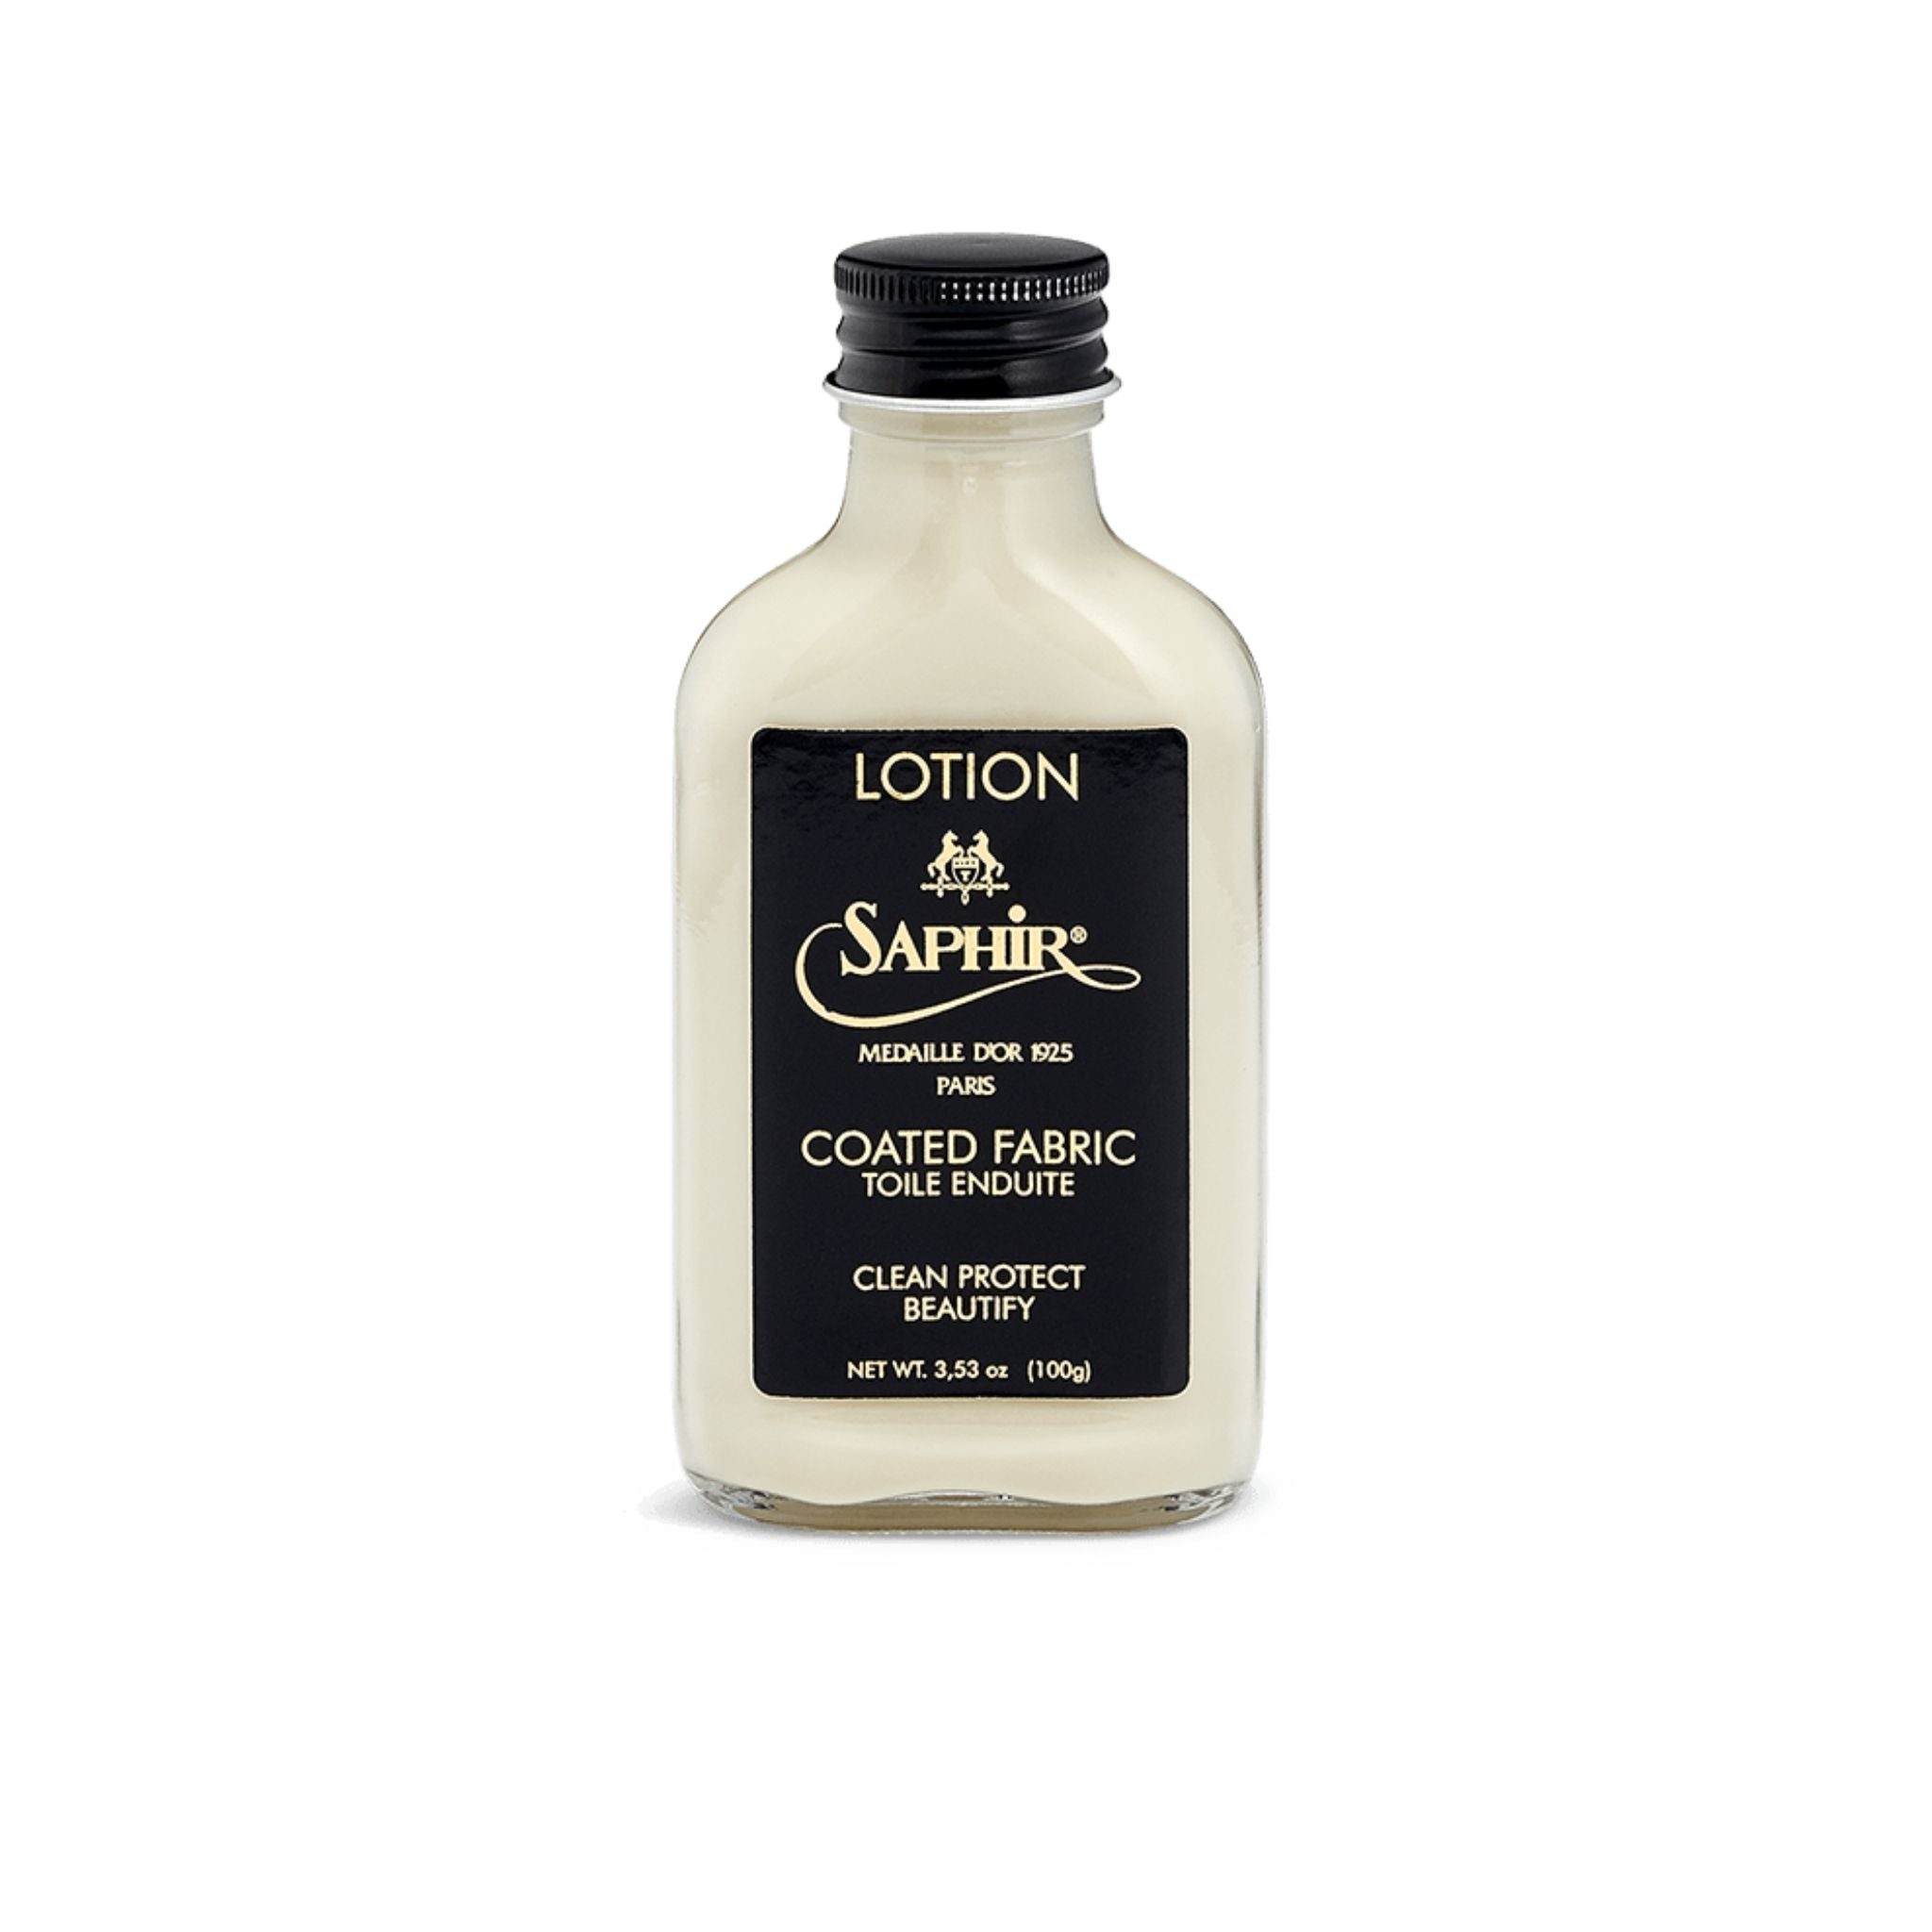 Saphir Coated Fabric Lotion to clean and remove dirt and greasy deposits on most coated fabrics. Stocked in Australia